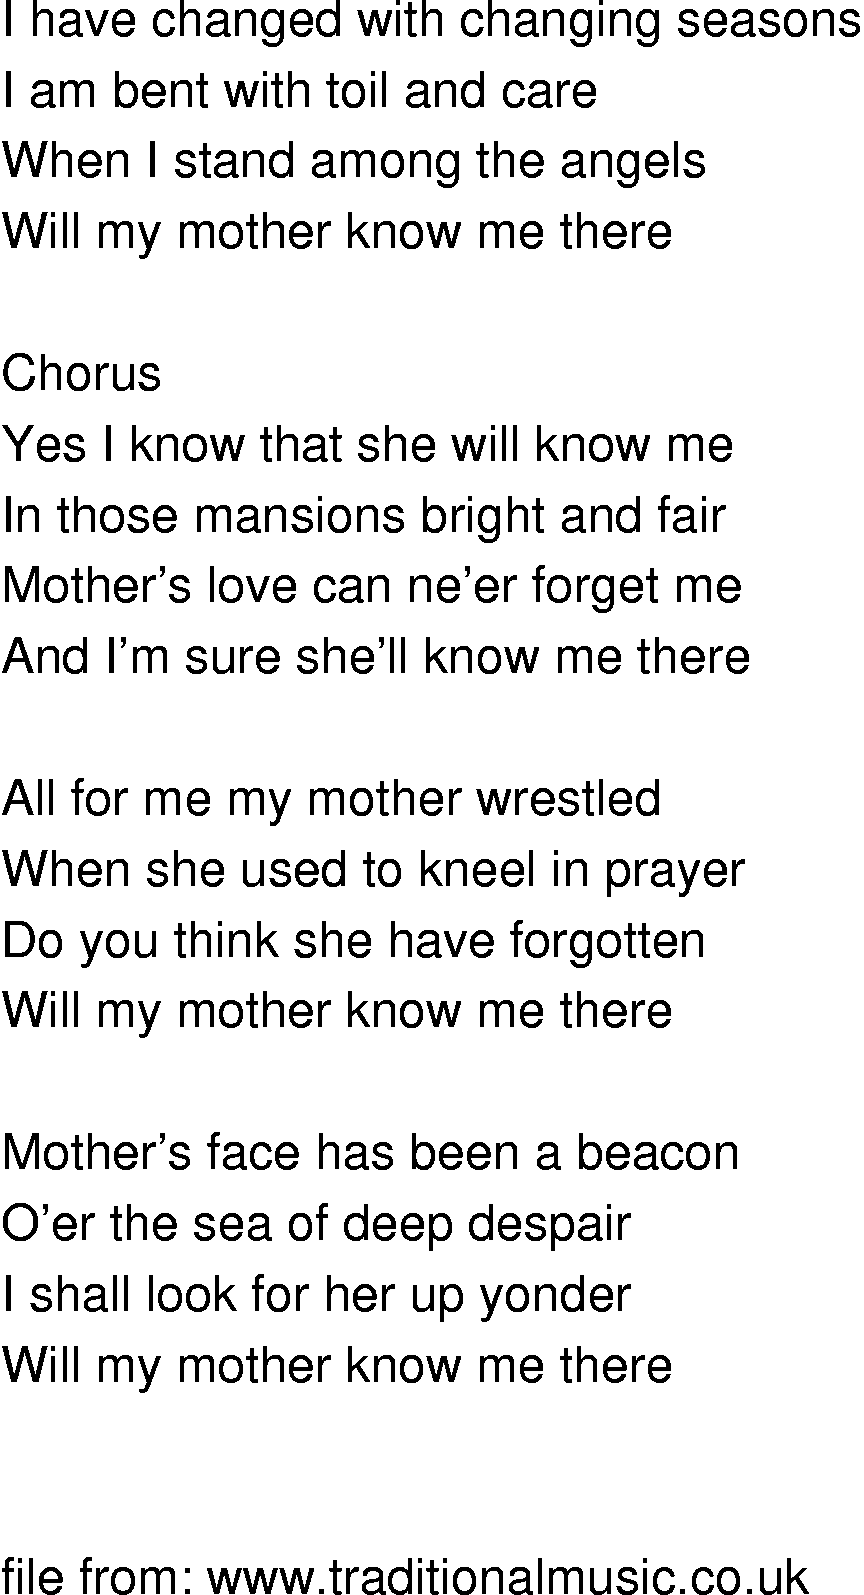 Old-Time (oldtimey) Song Lyrics - will my mother know me there